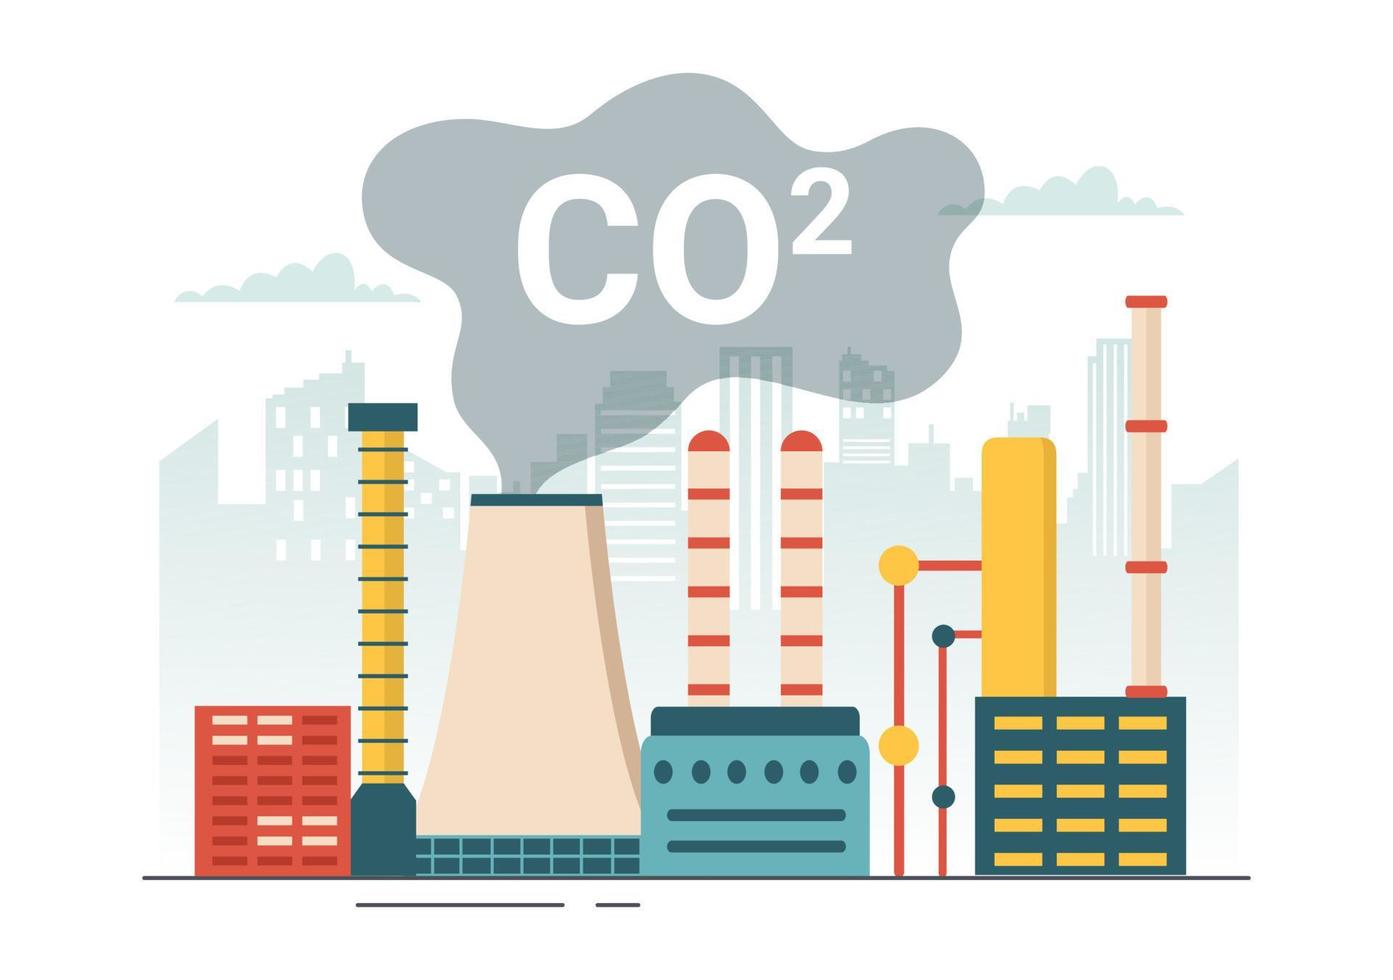 Carbon Dioxide or CO2 Illustration to Save Planet Earth from Climate Change as a Result of Factory and Vehicle Pollution in Hand Drawn Templates vector